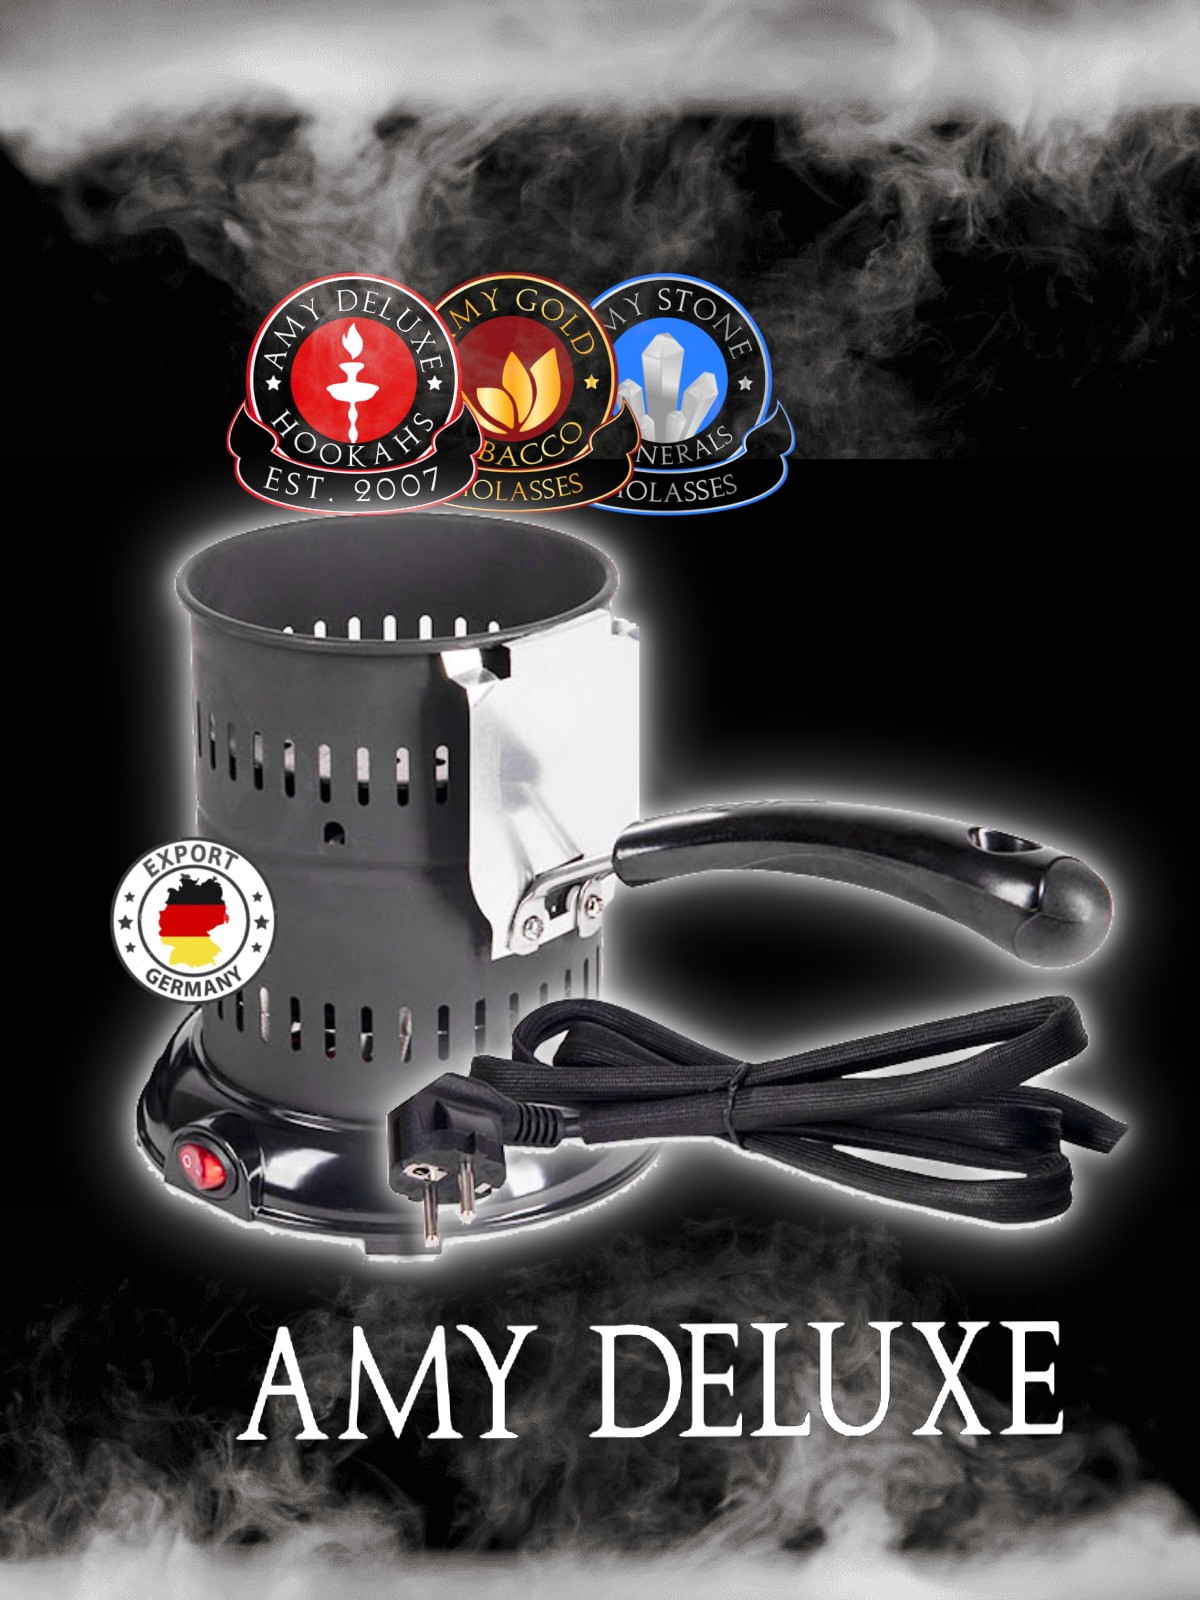 Hot Plate Charcoal Burner AMY PRIMER 69Amy Deluxe / Color Black – Electric Fire Lighter KA010 500W / 230v – 50Hz / 1.5 m Length of Power cord